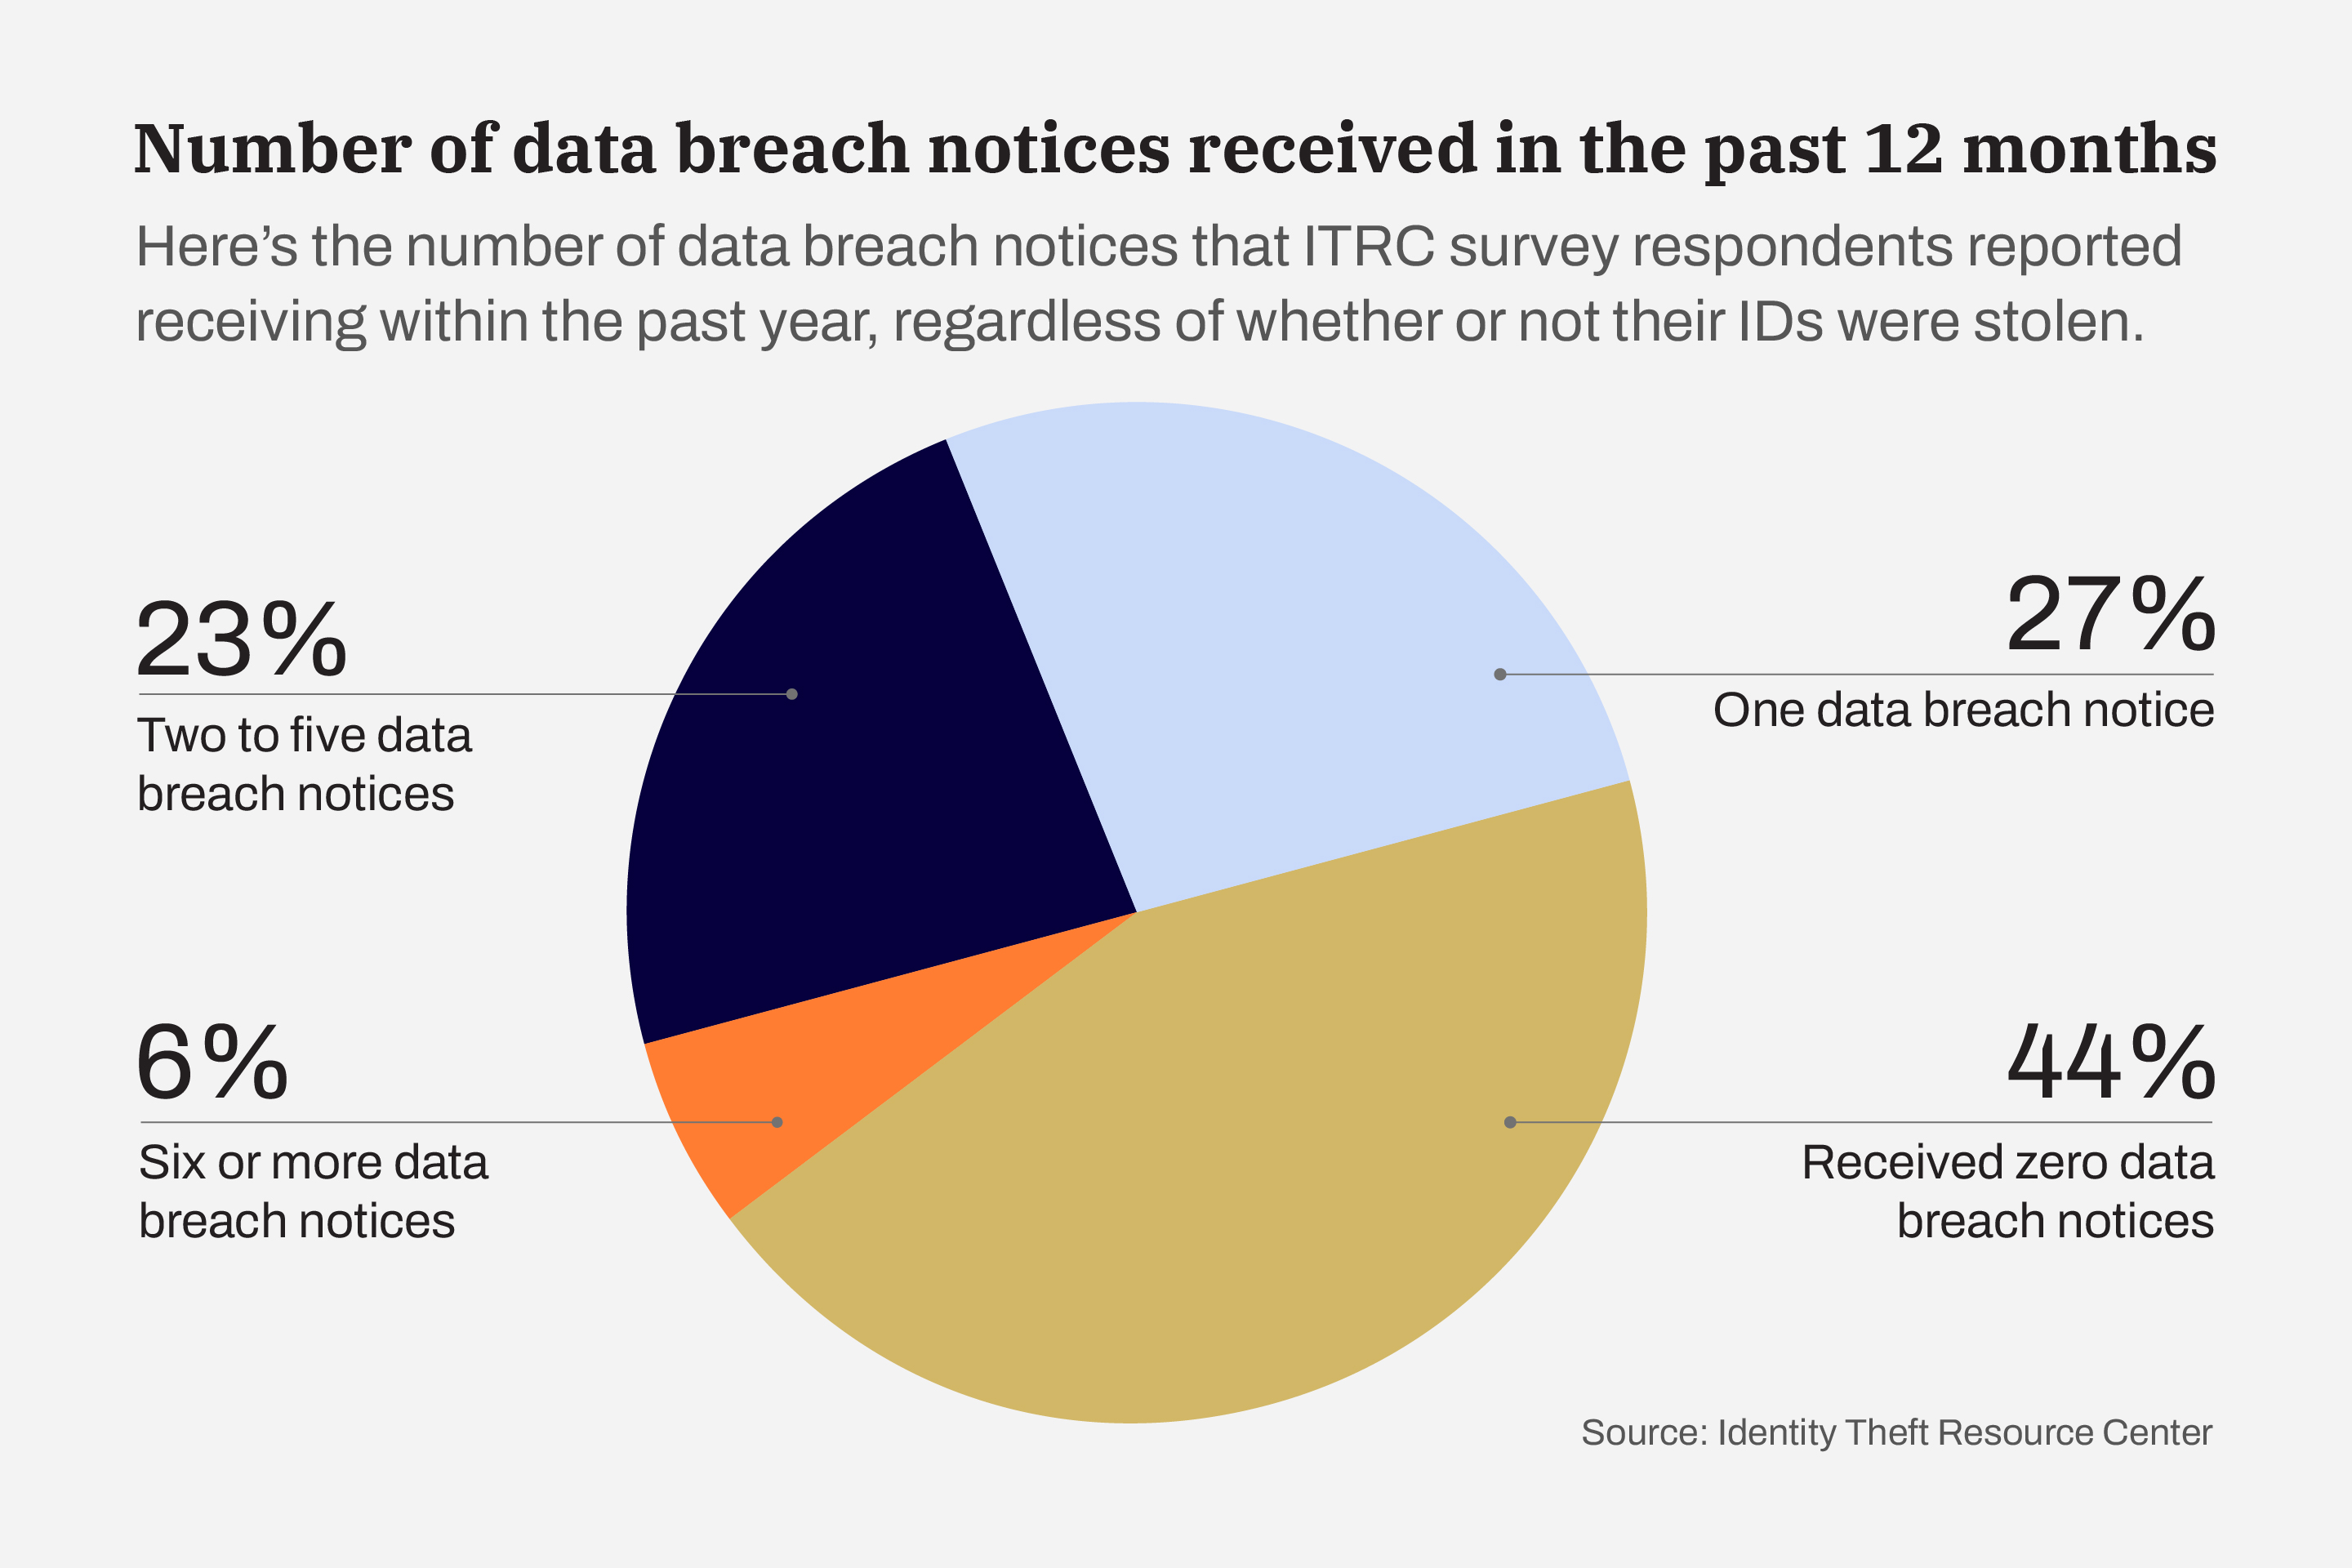 Graphic: Number of data breach notices received in the past 12 months